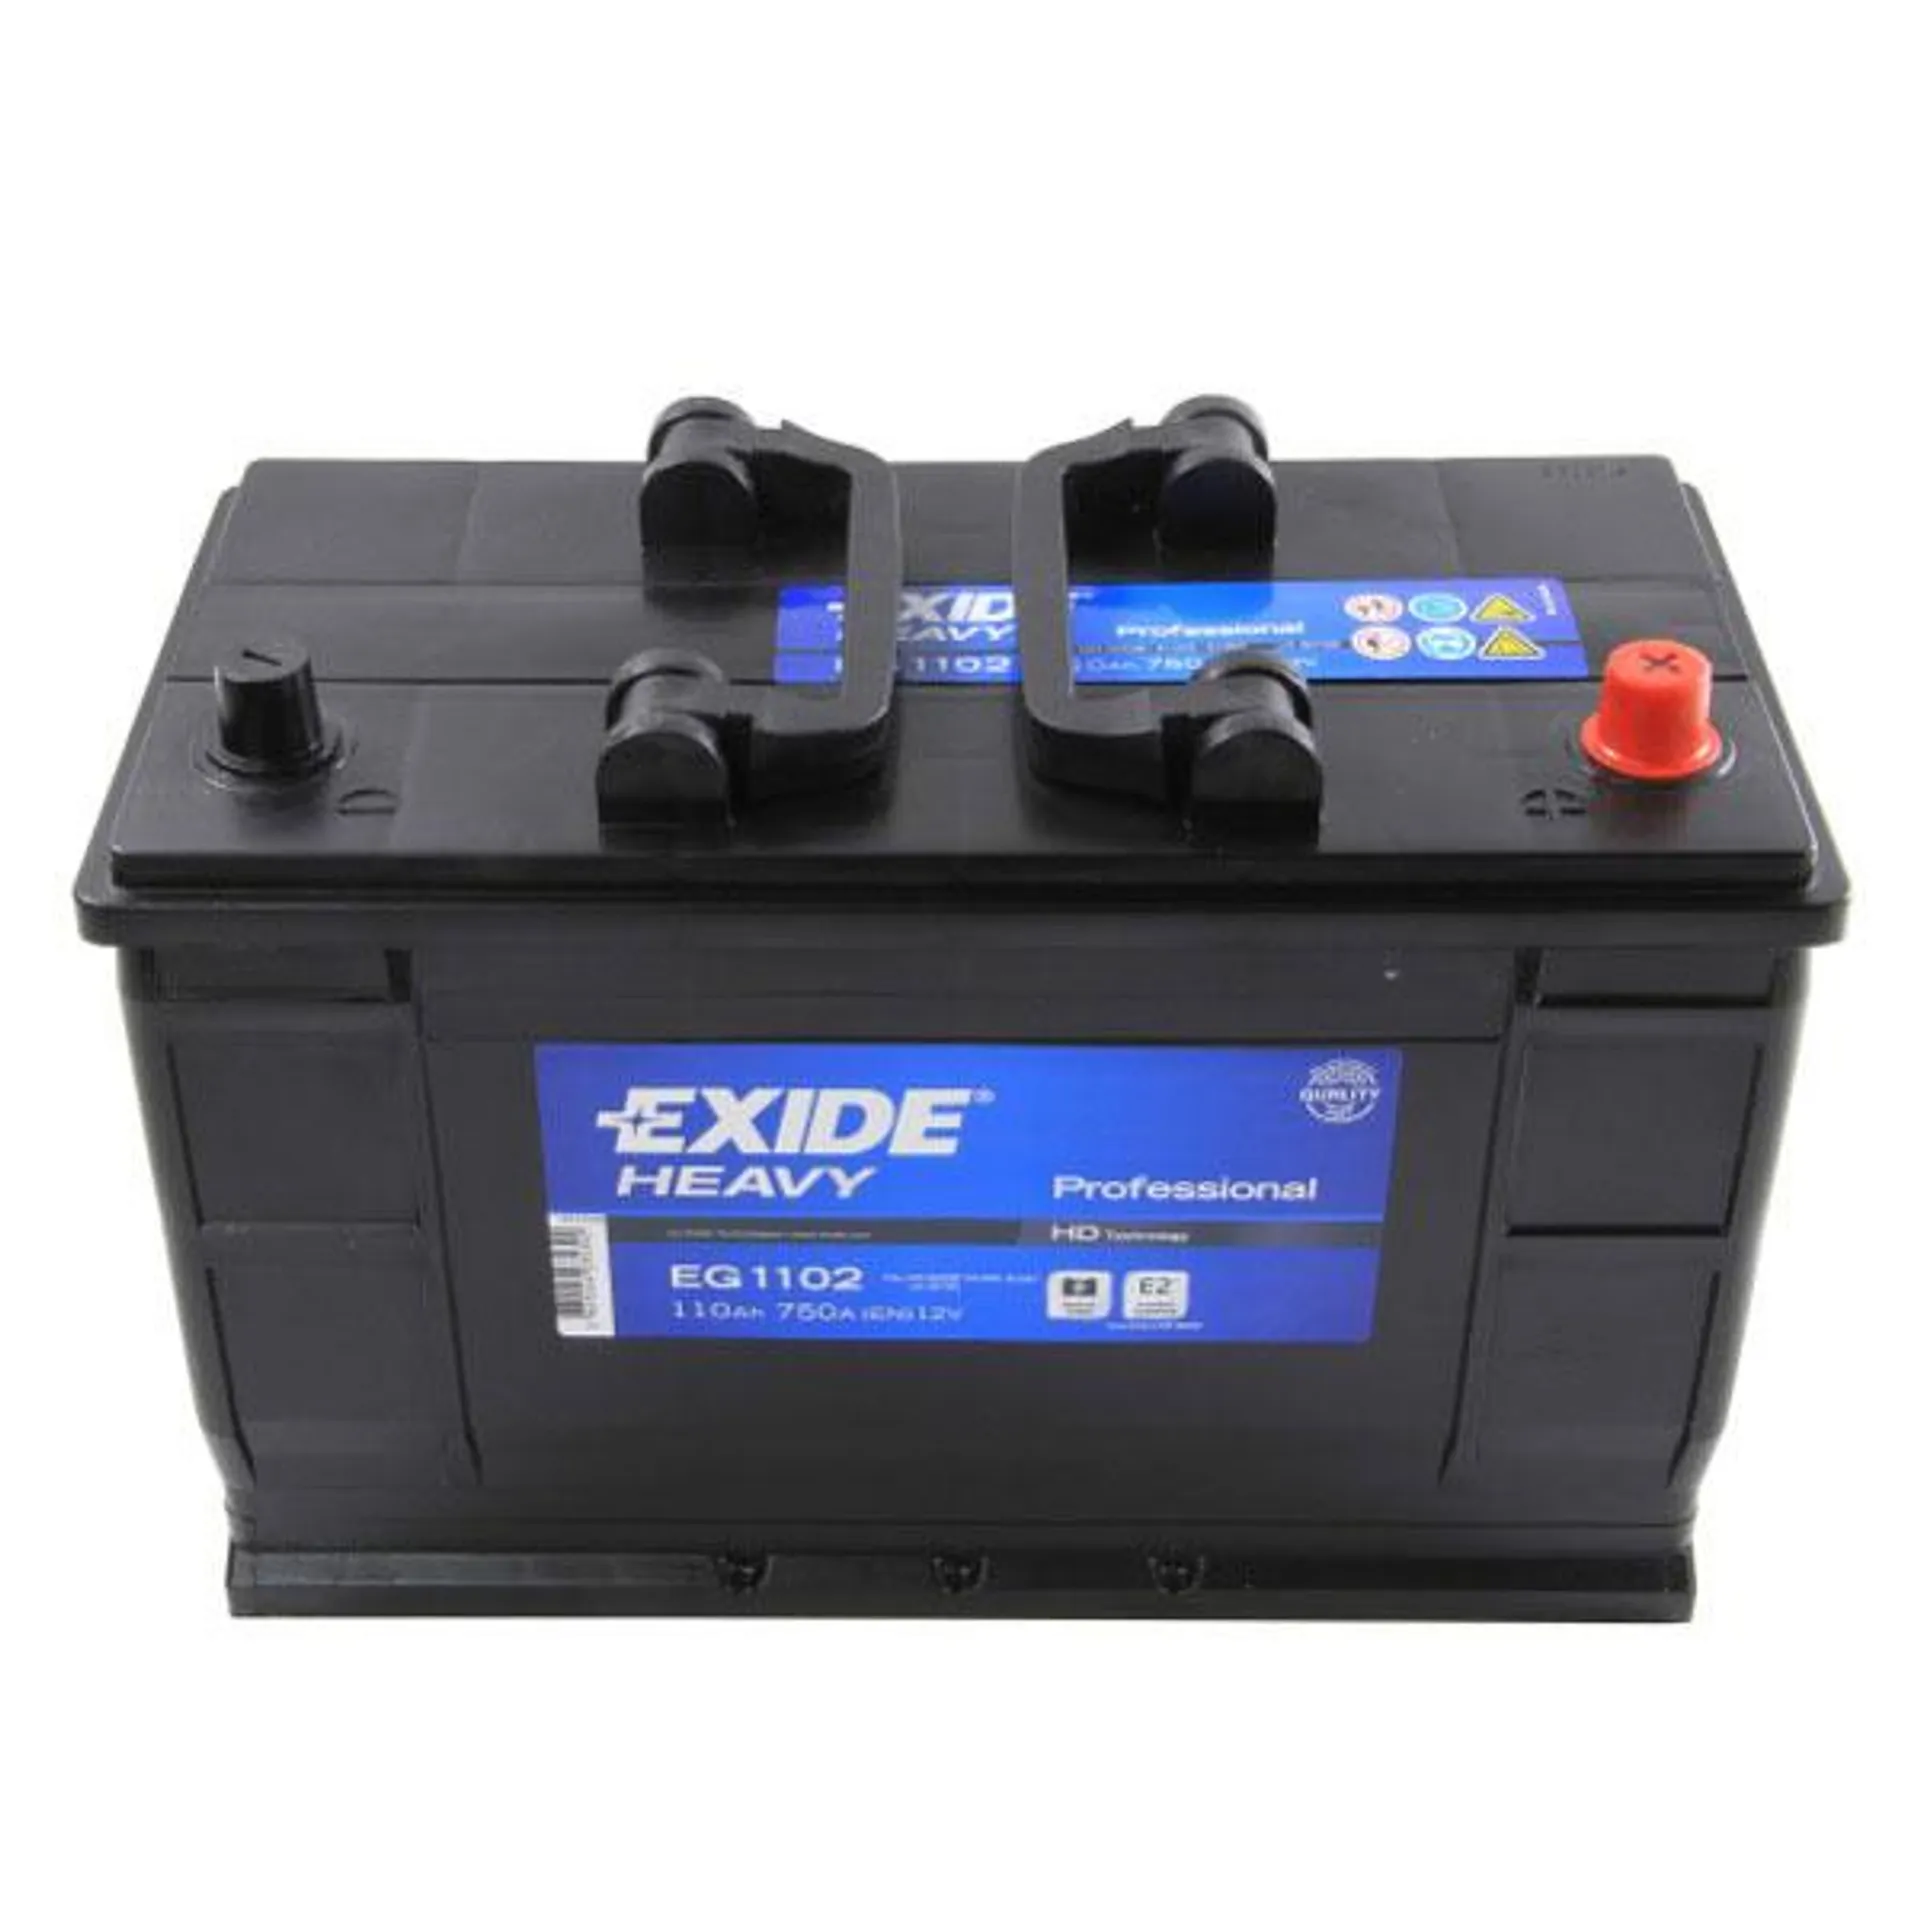 Exide Commercial Battery 667 - 2 Year Guarantee